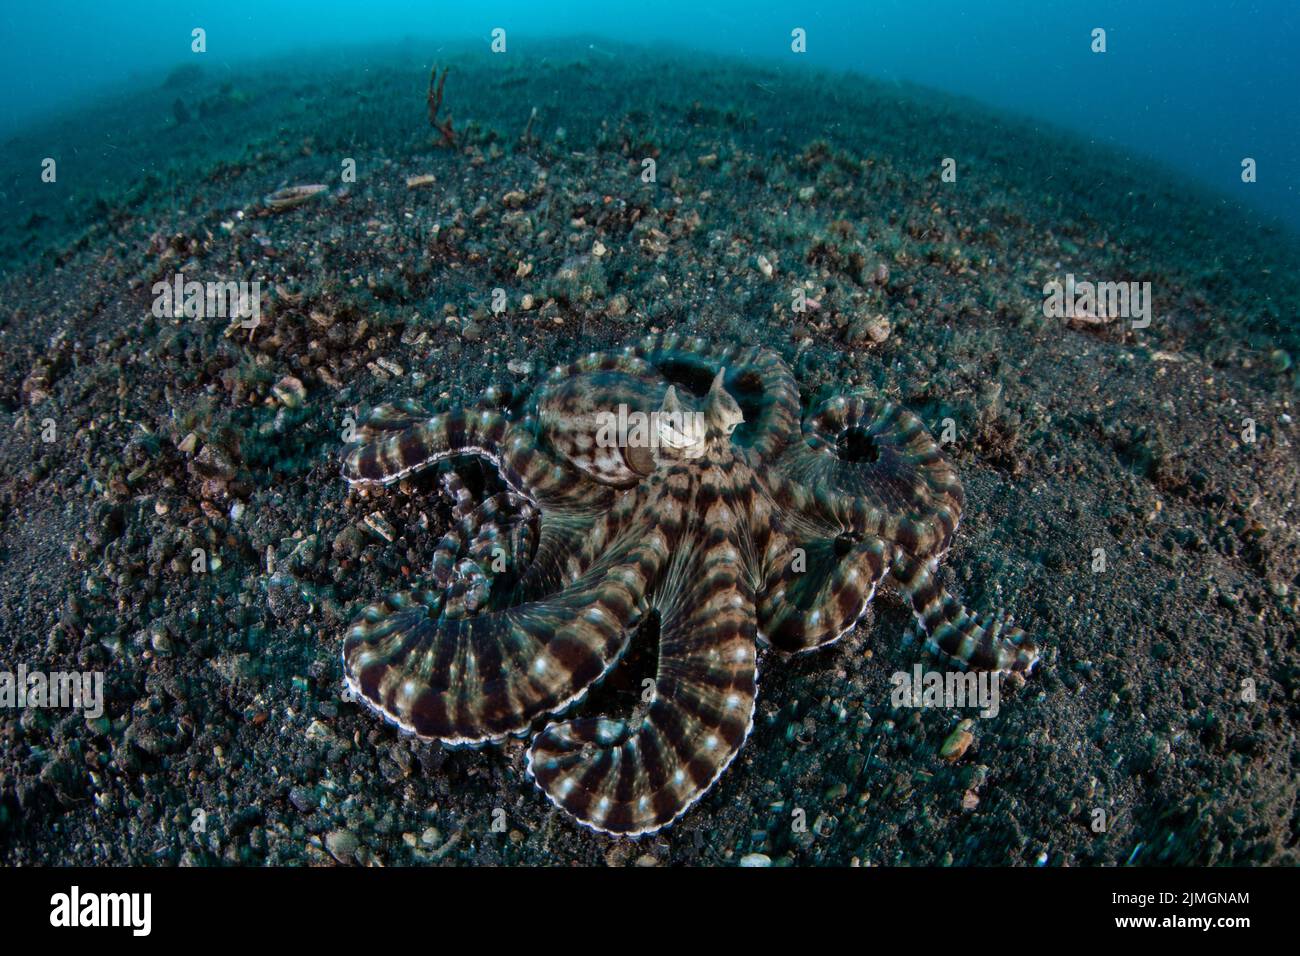 A Mimic octopus, Thaumoctopus mimicus, is found crawling across the black sand of Lembeh Strait, Indonesia. This unusual creature mimics other species. Stock Photo